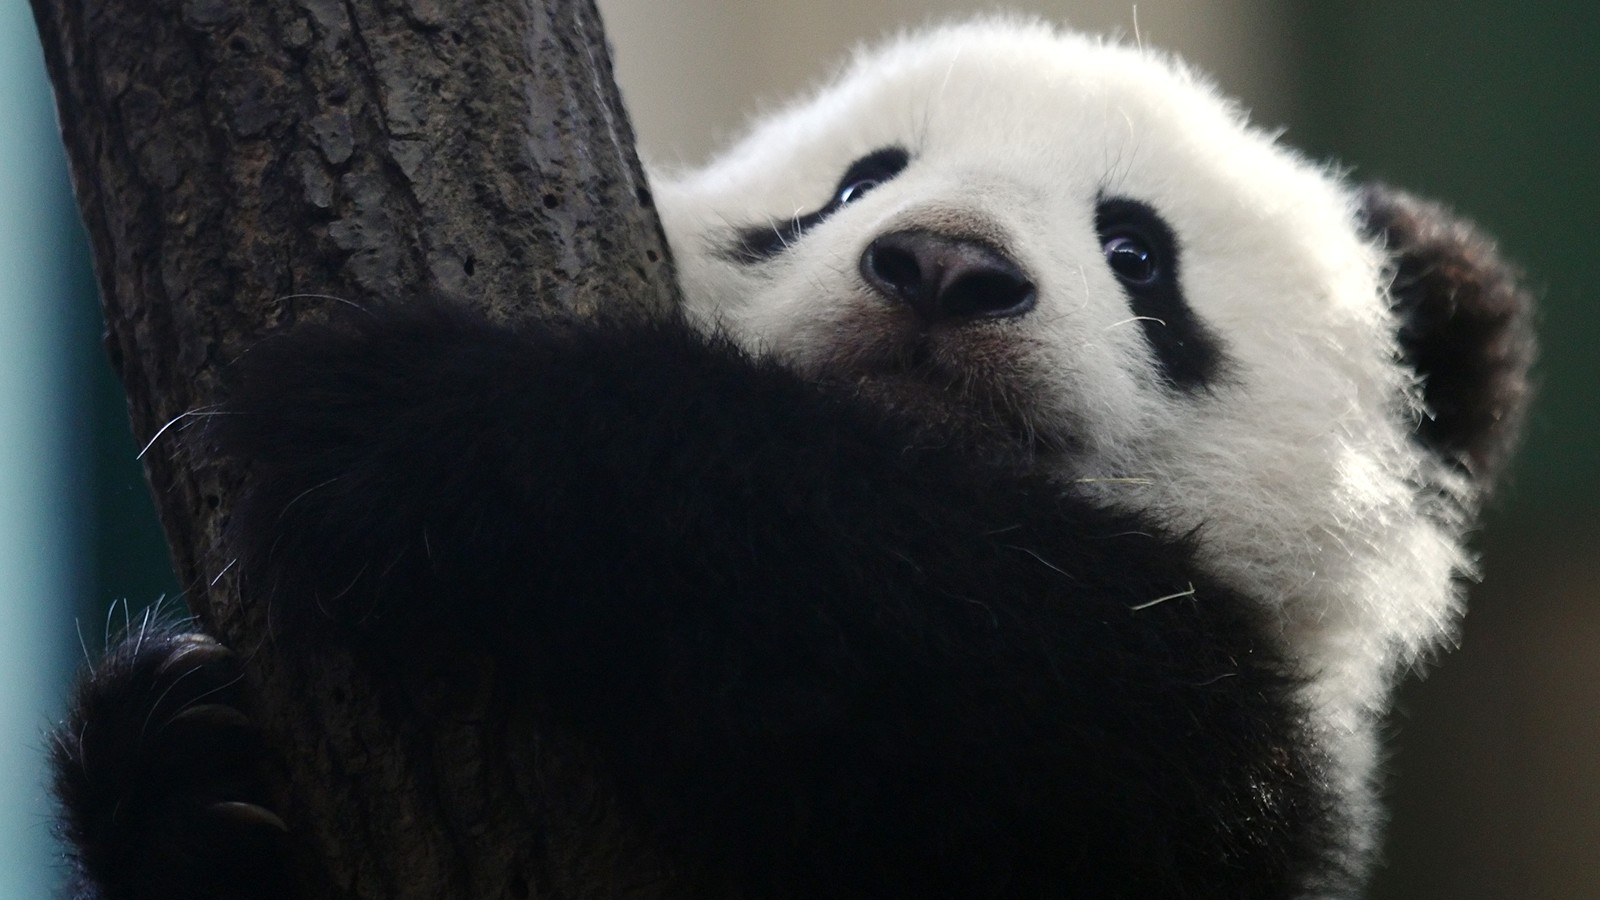 Becoming a father changed Panda's life